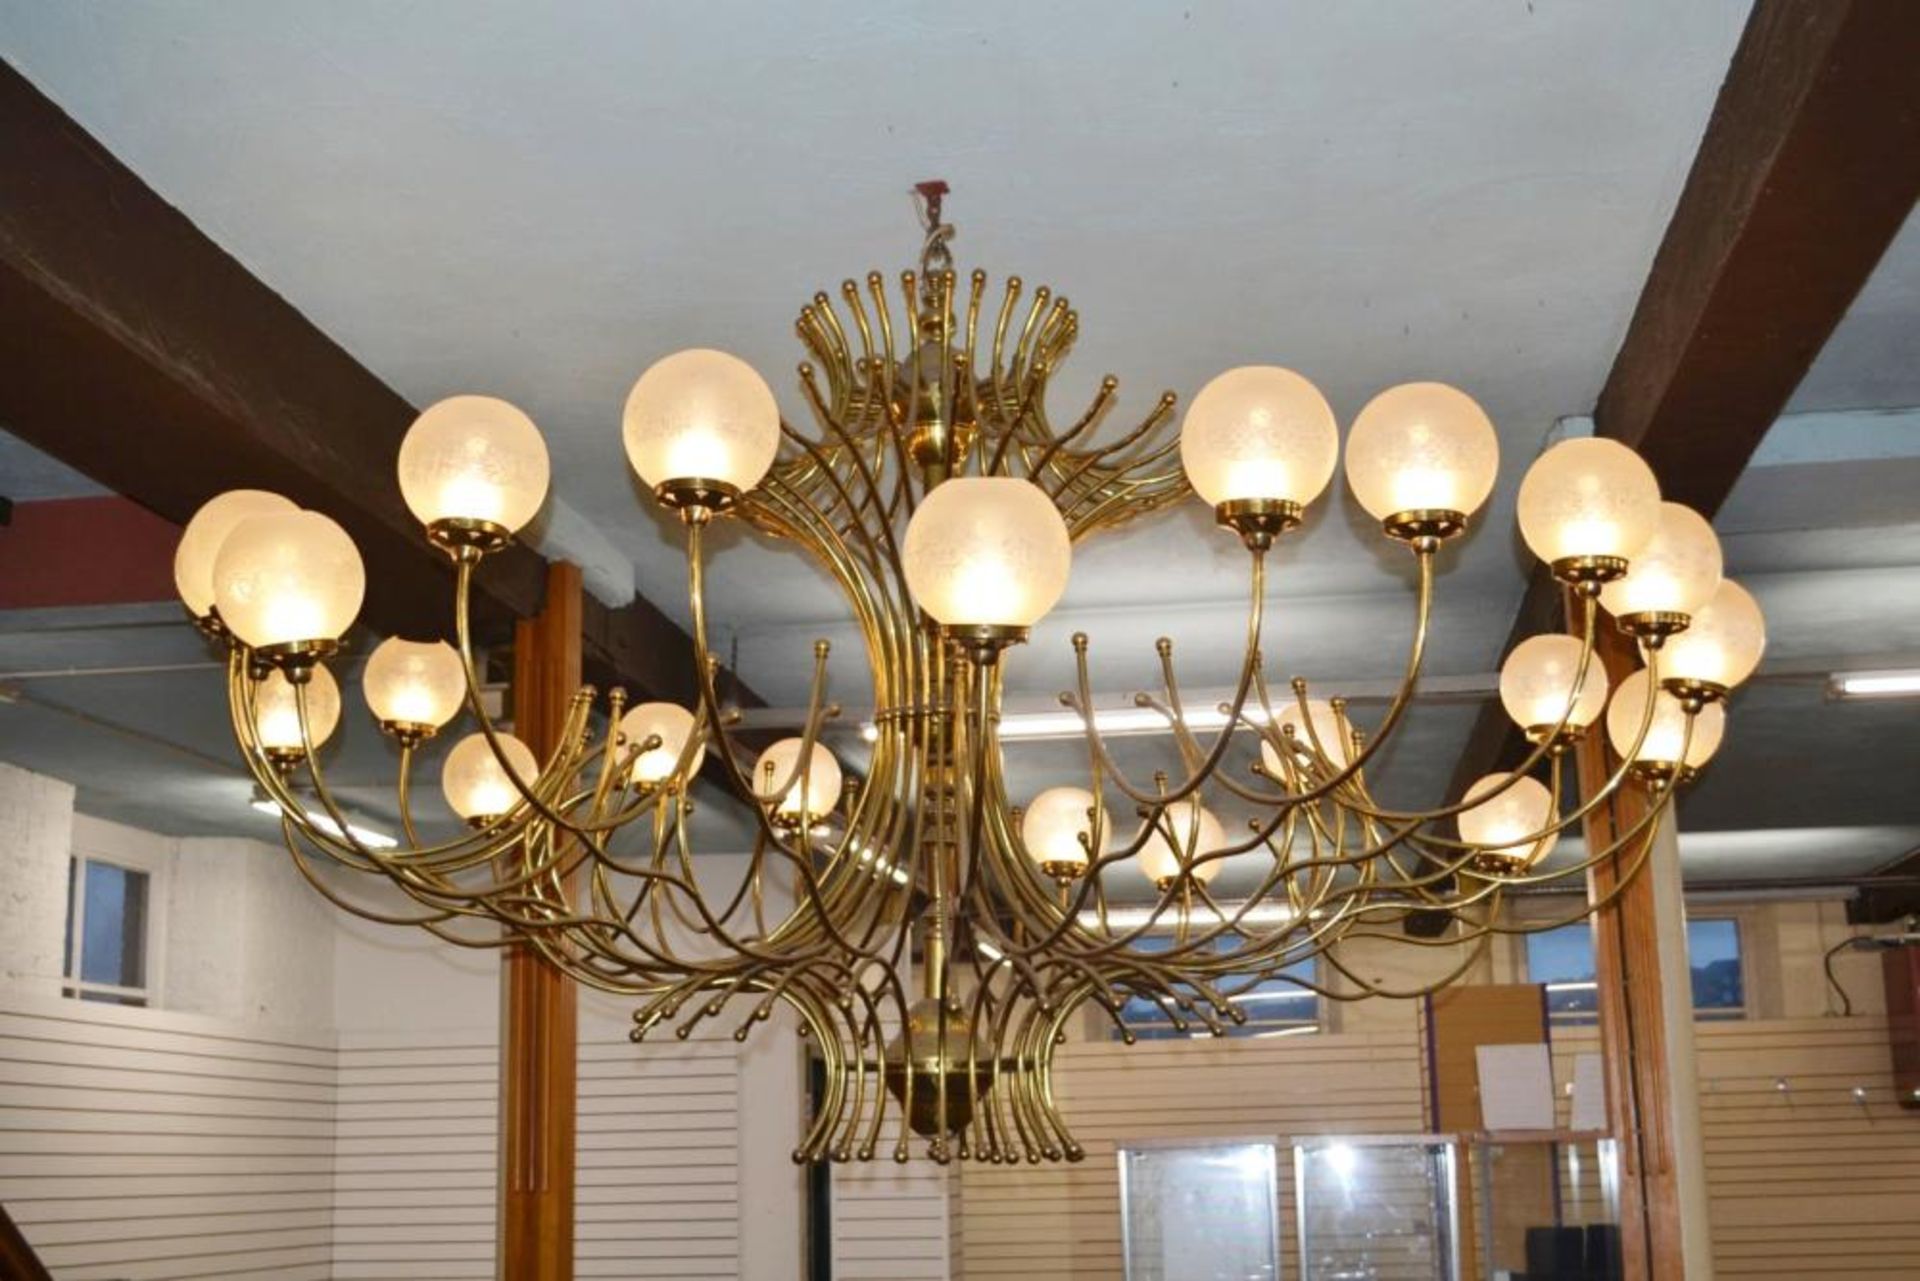 1 x Vintage 24 Light Brass Chandelier With Opaque Globe Shades - 261 cms Width - Ref BB000 - CL351 - - Image 7 of 7